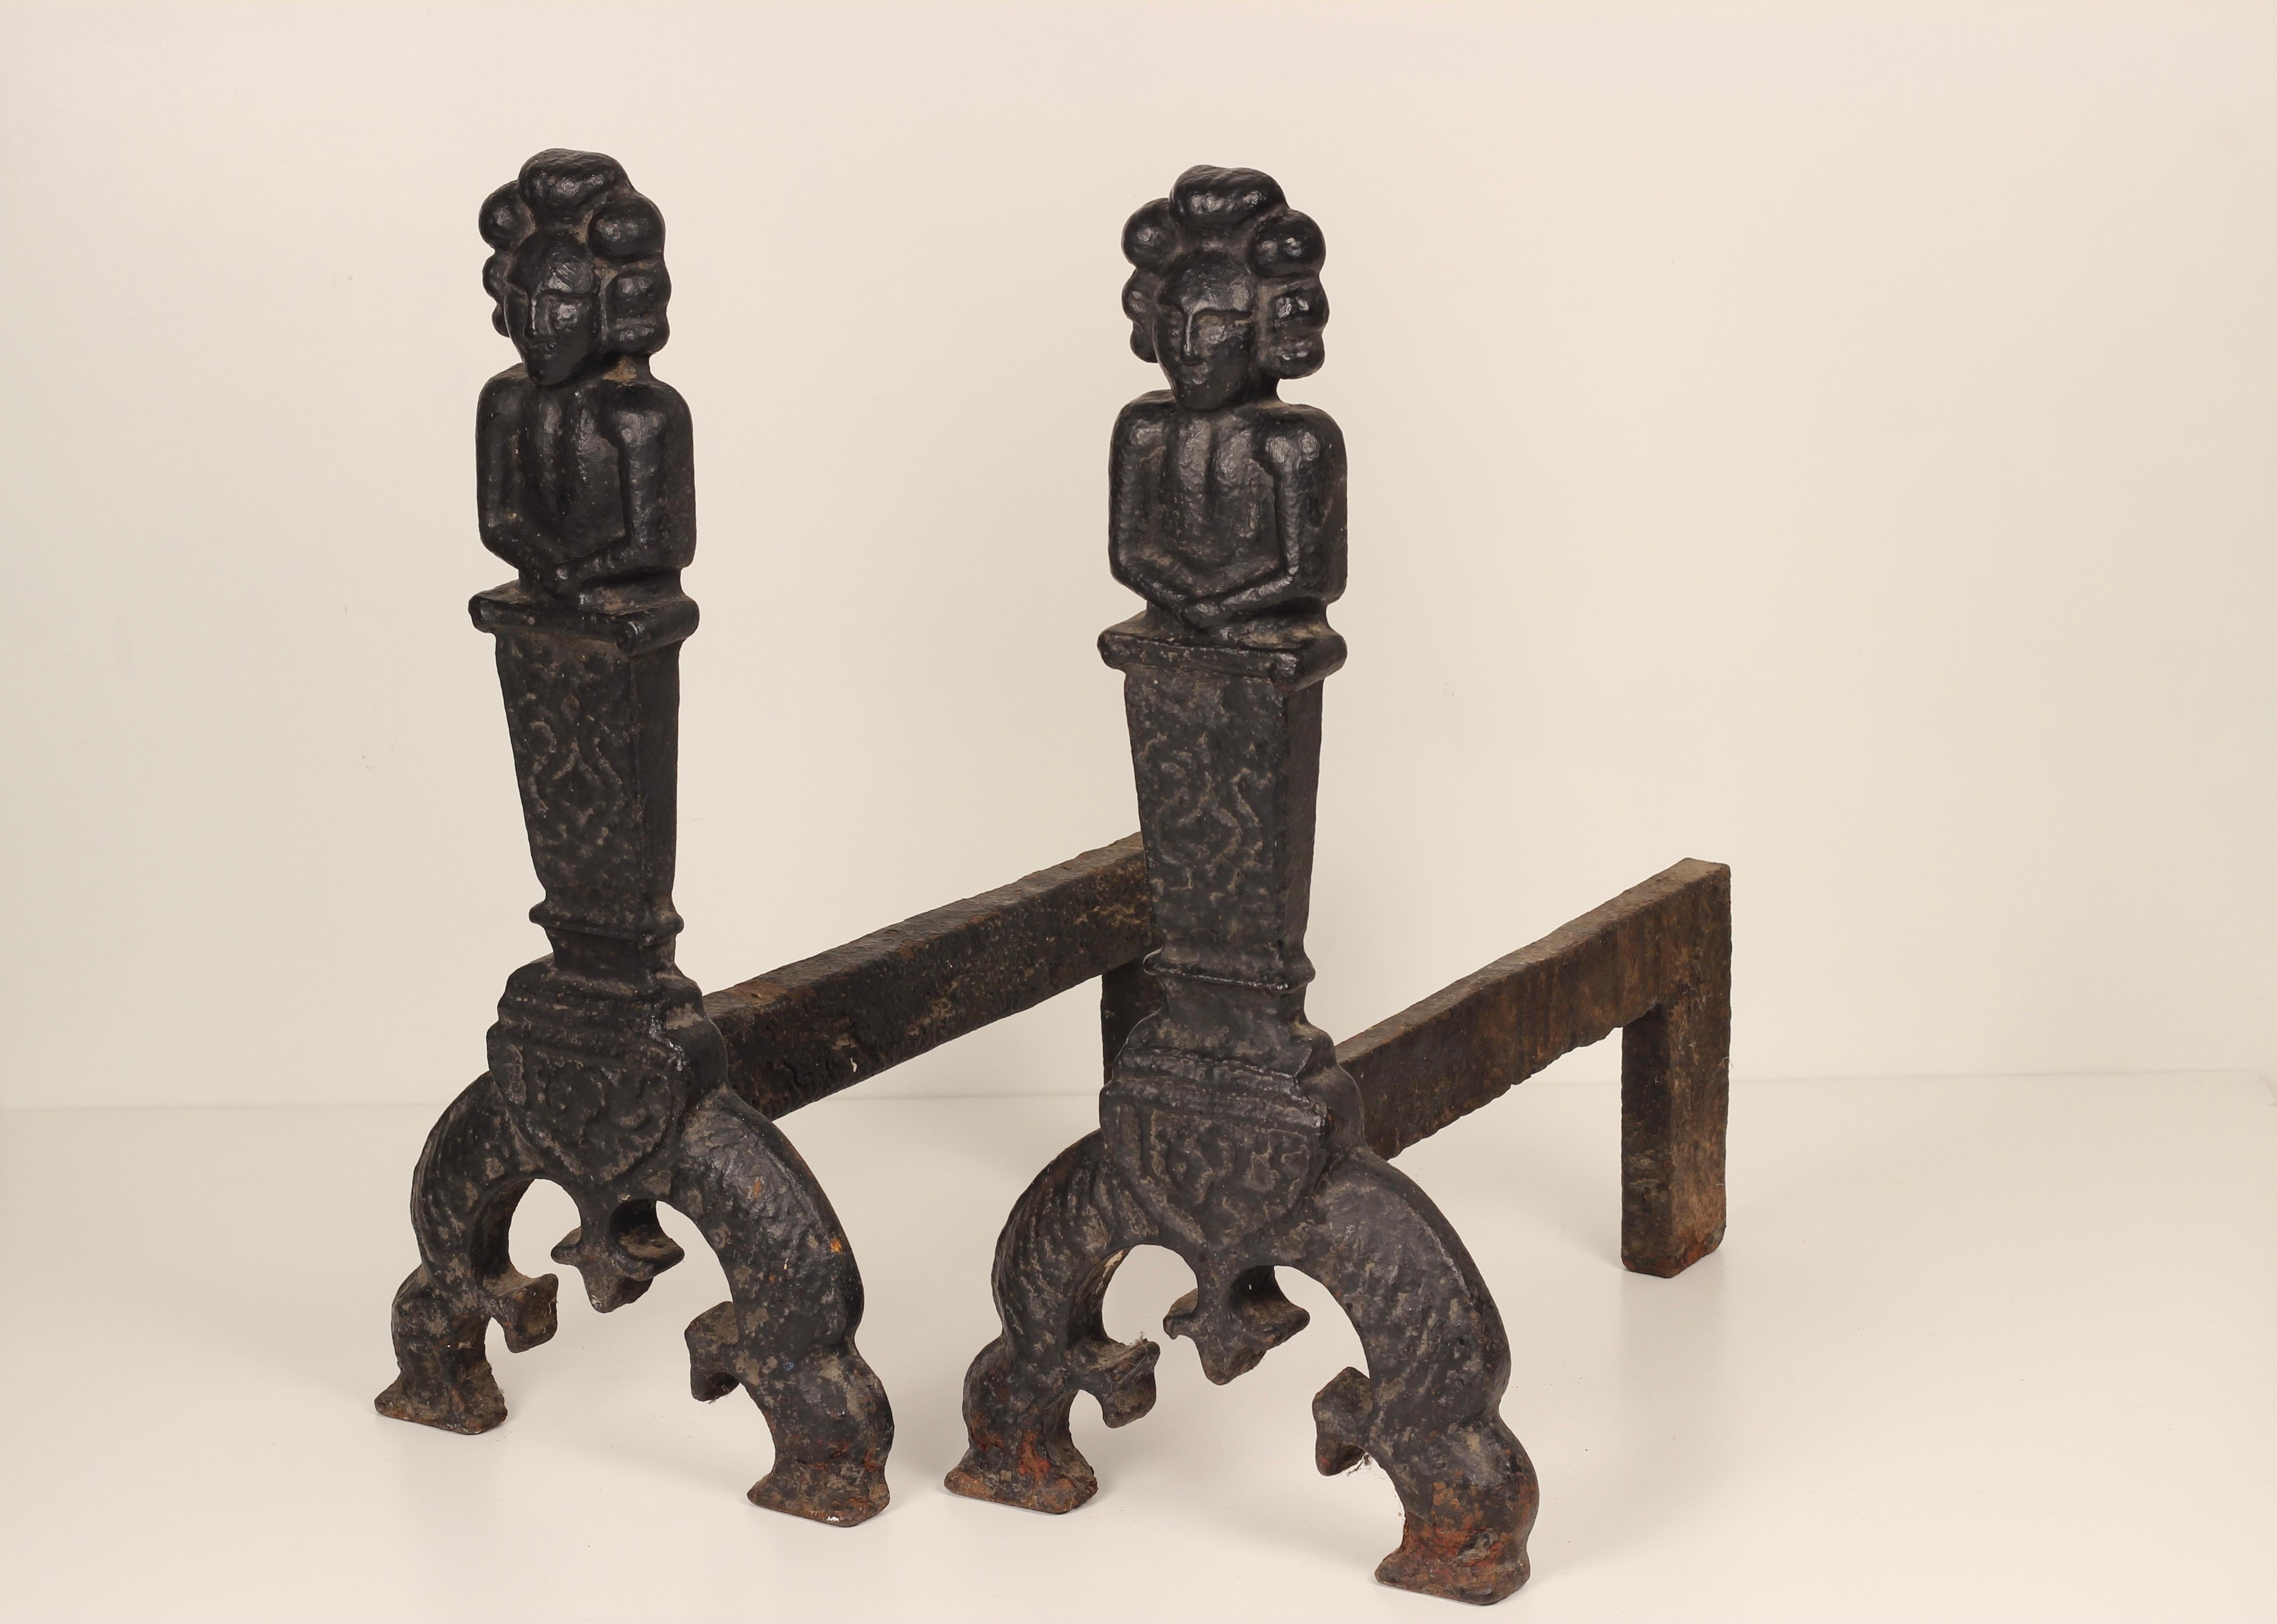 A very large and heavy set of Victorian Gothic revival Fire dogs or Andirons made from Iron. Possibly modelled on a much earlier pair. The Victorian Gothic movement or Victorian Revival movement started in England in the 1740s and gained much